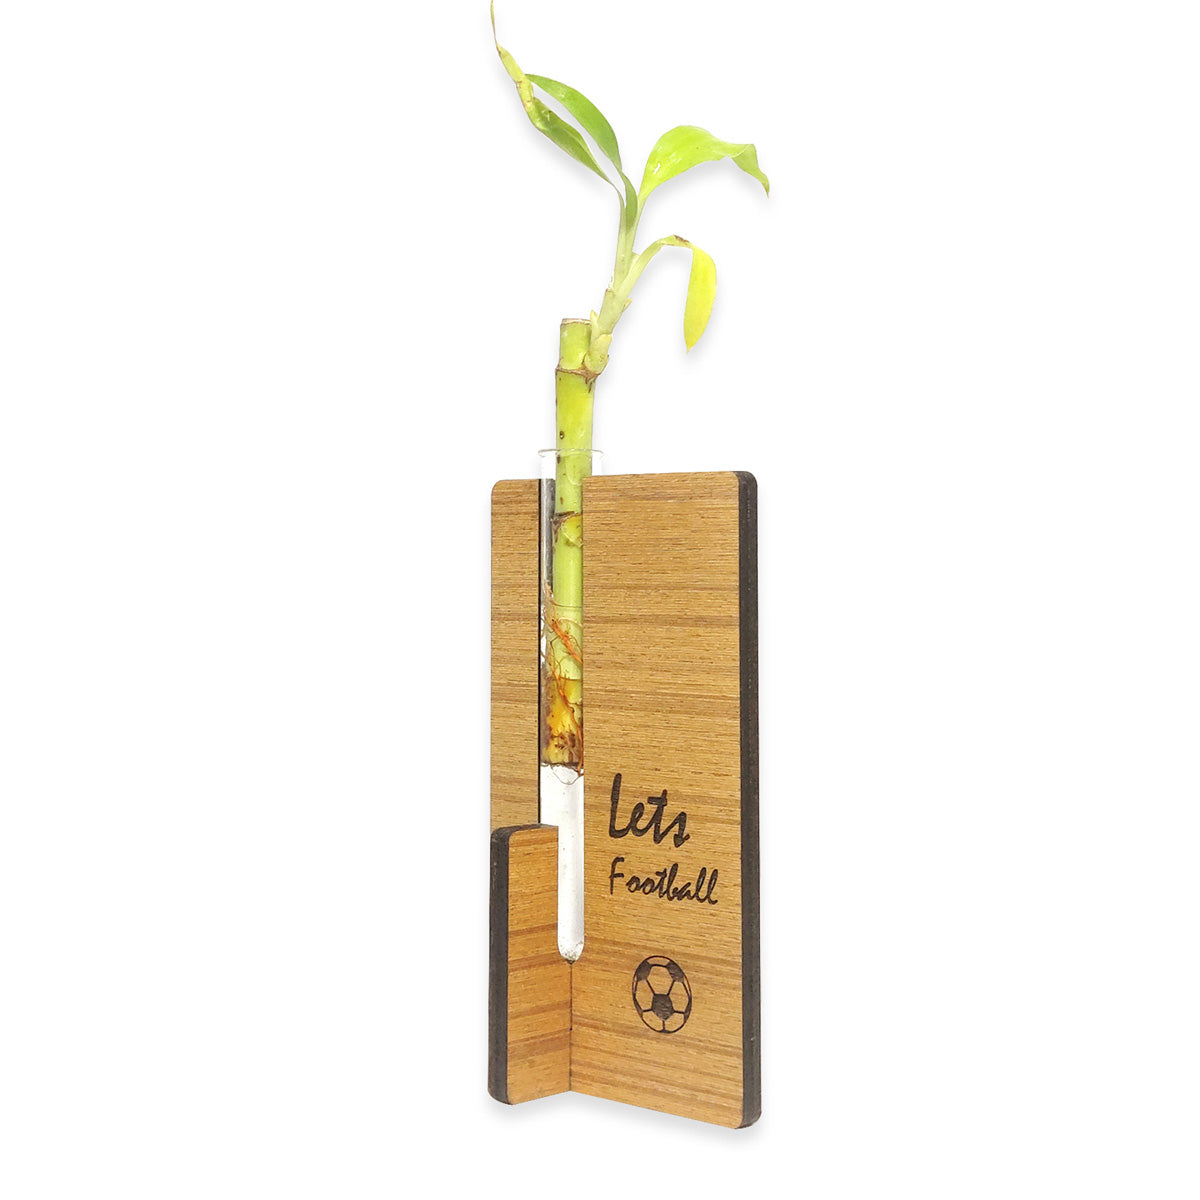 Customize Wooden Engraved Plant Vase Gift